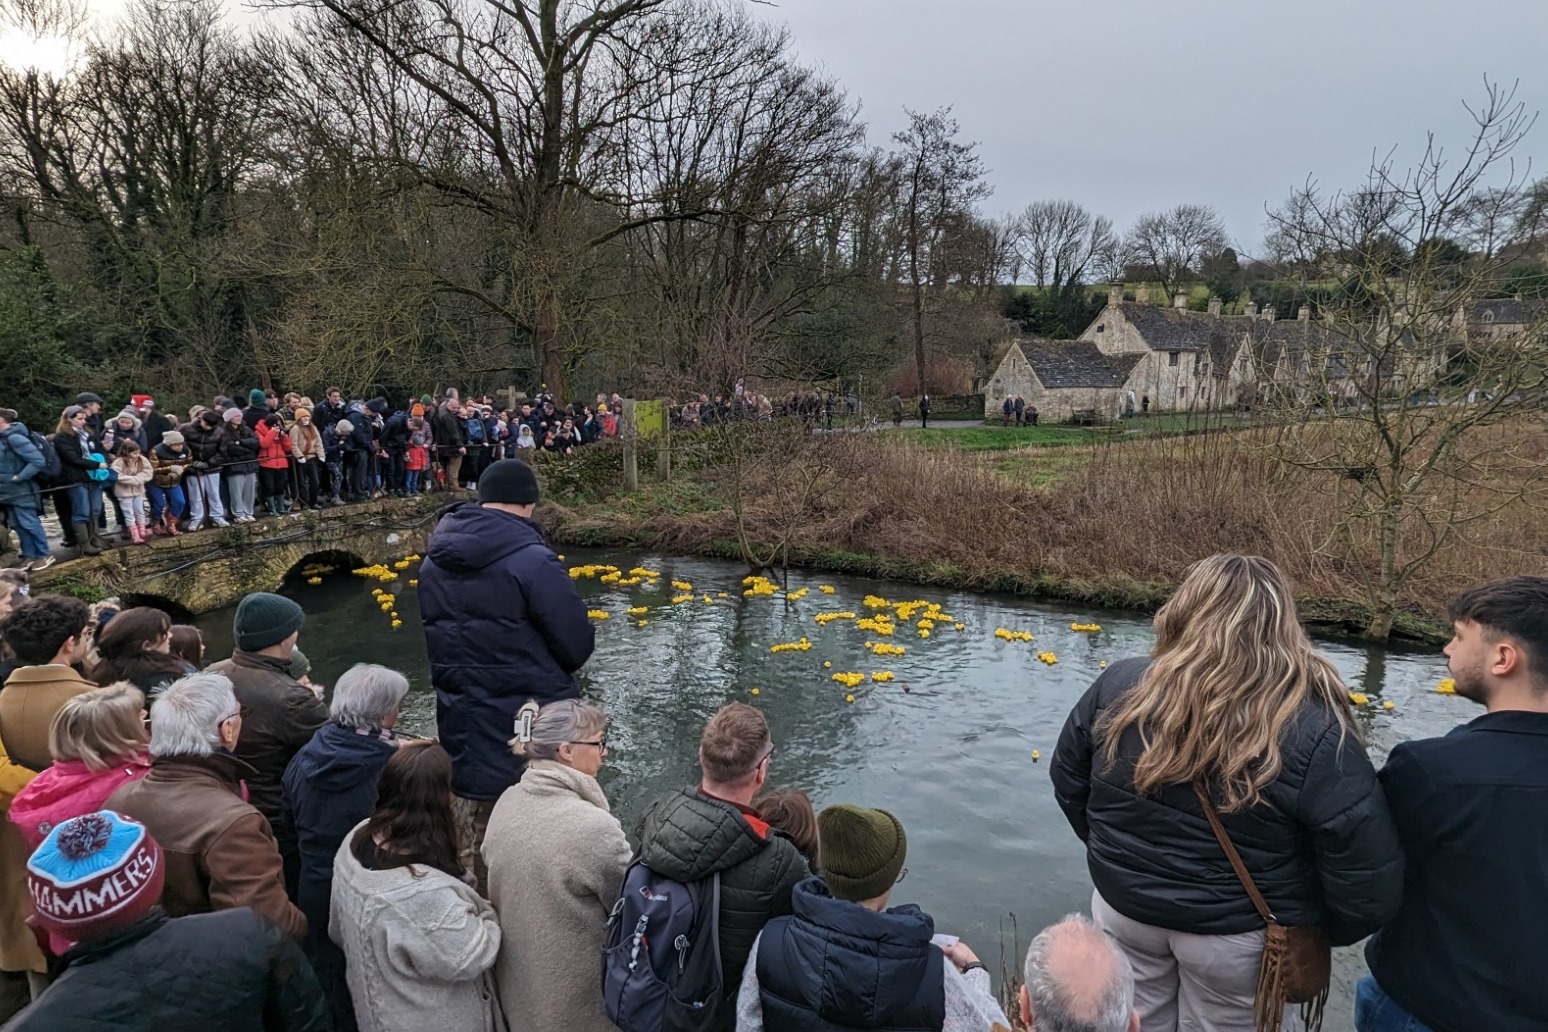 3,000 rubber ducks take to river in Cotswolds village for annual race 